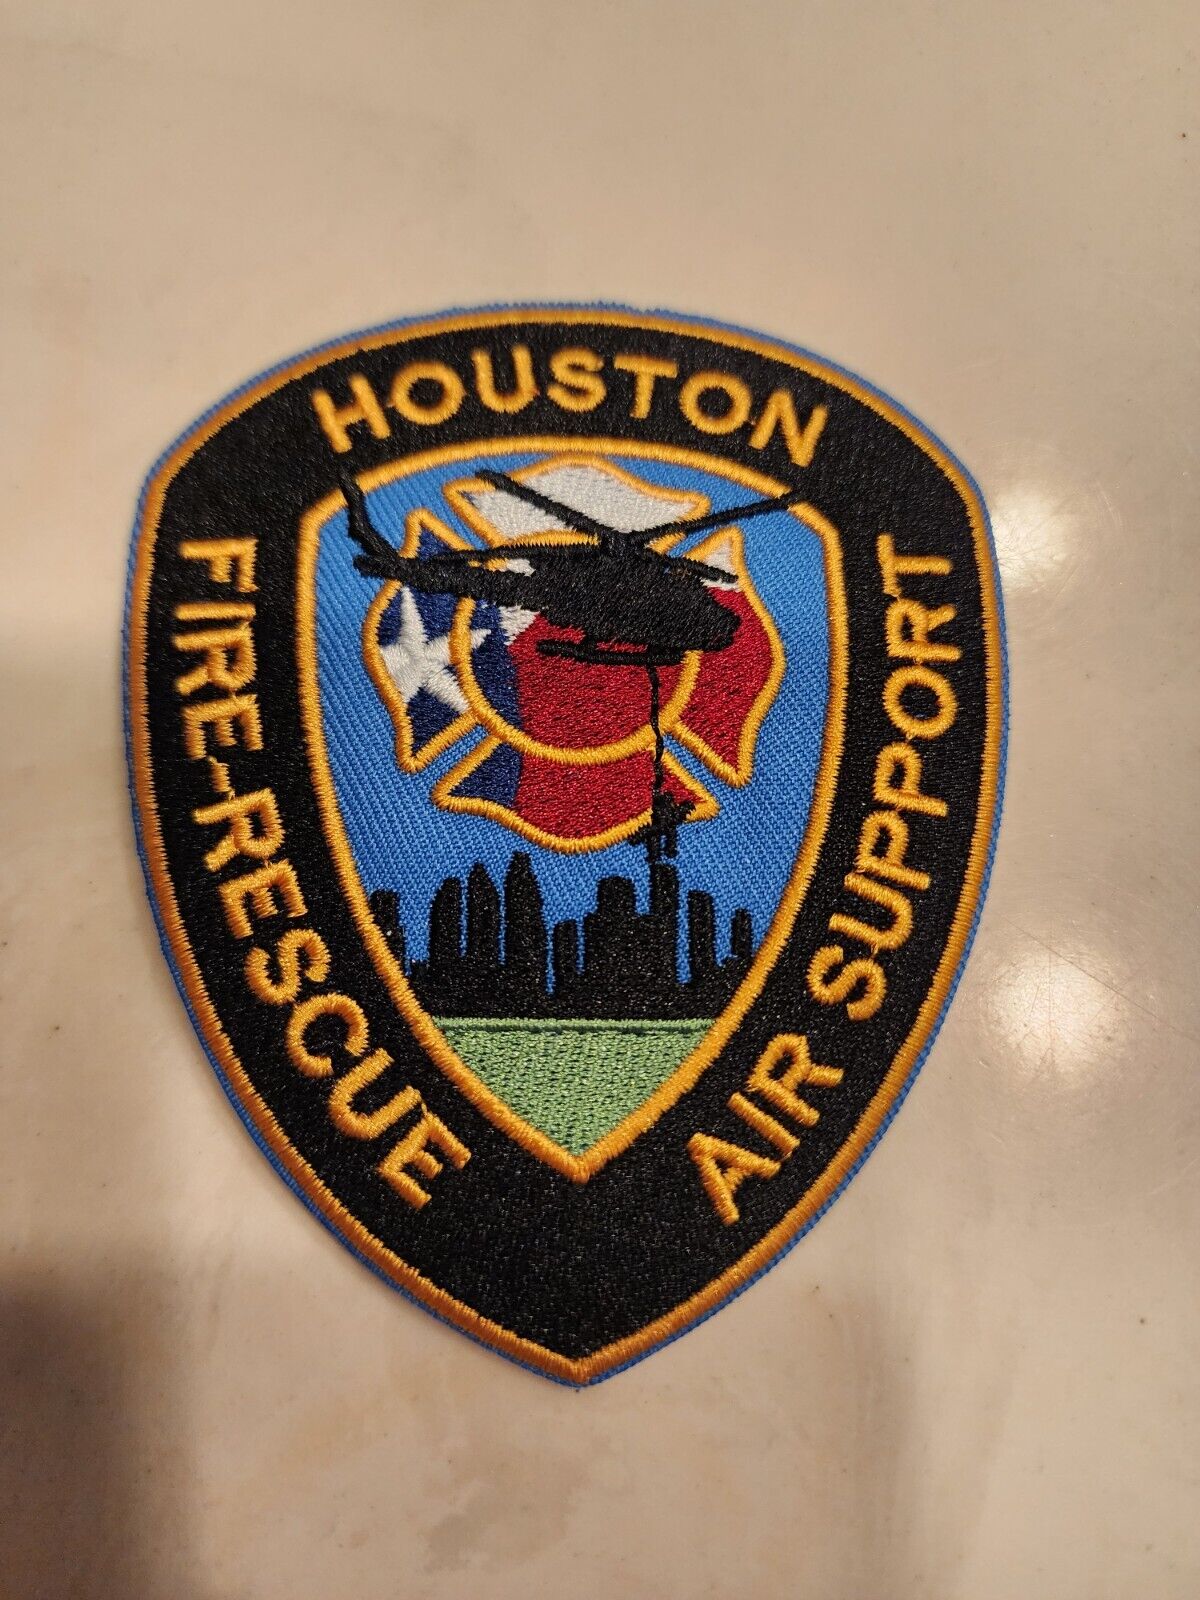 Houston Fire Air Support Fire Department patches - new 